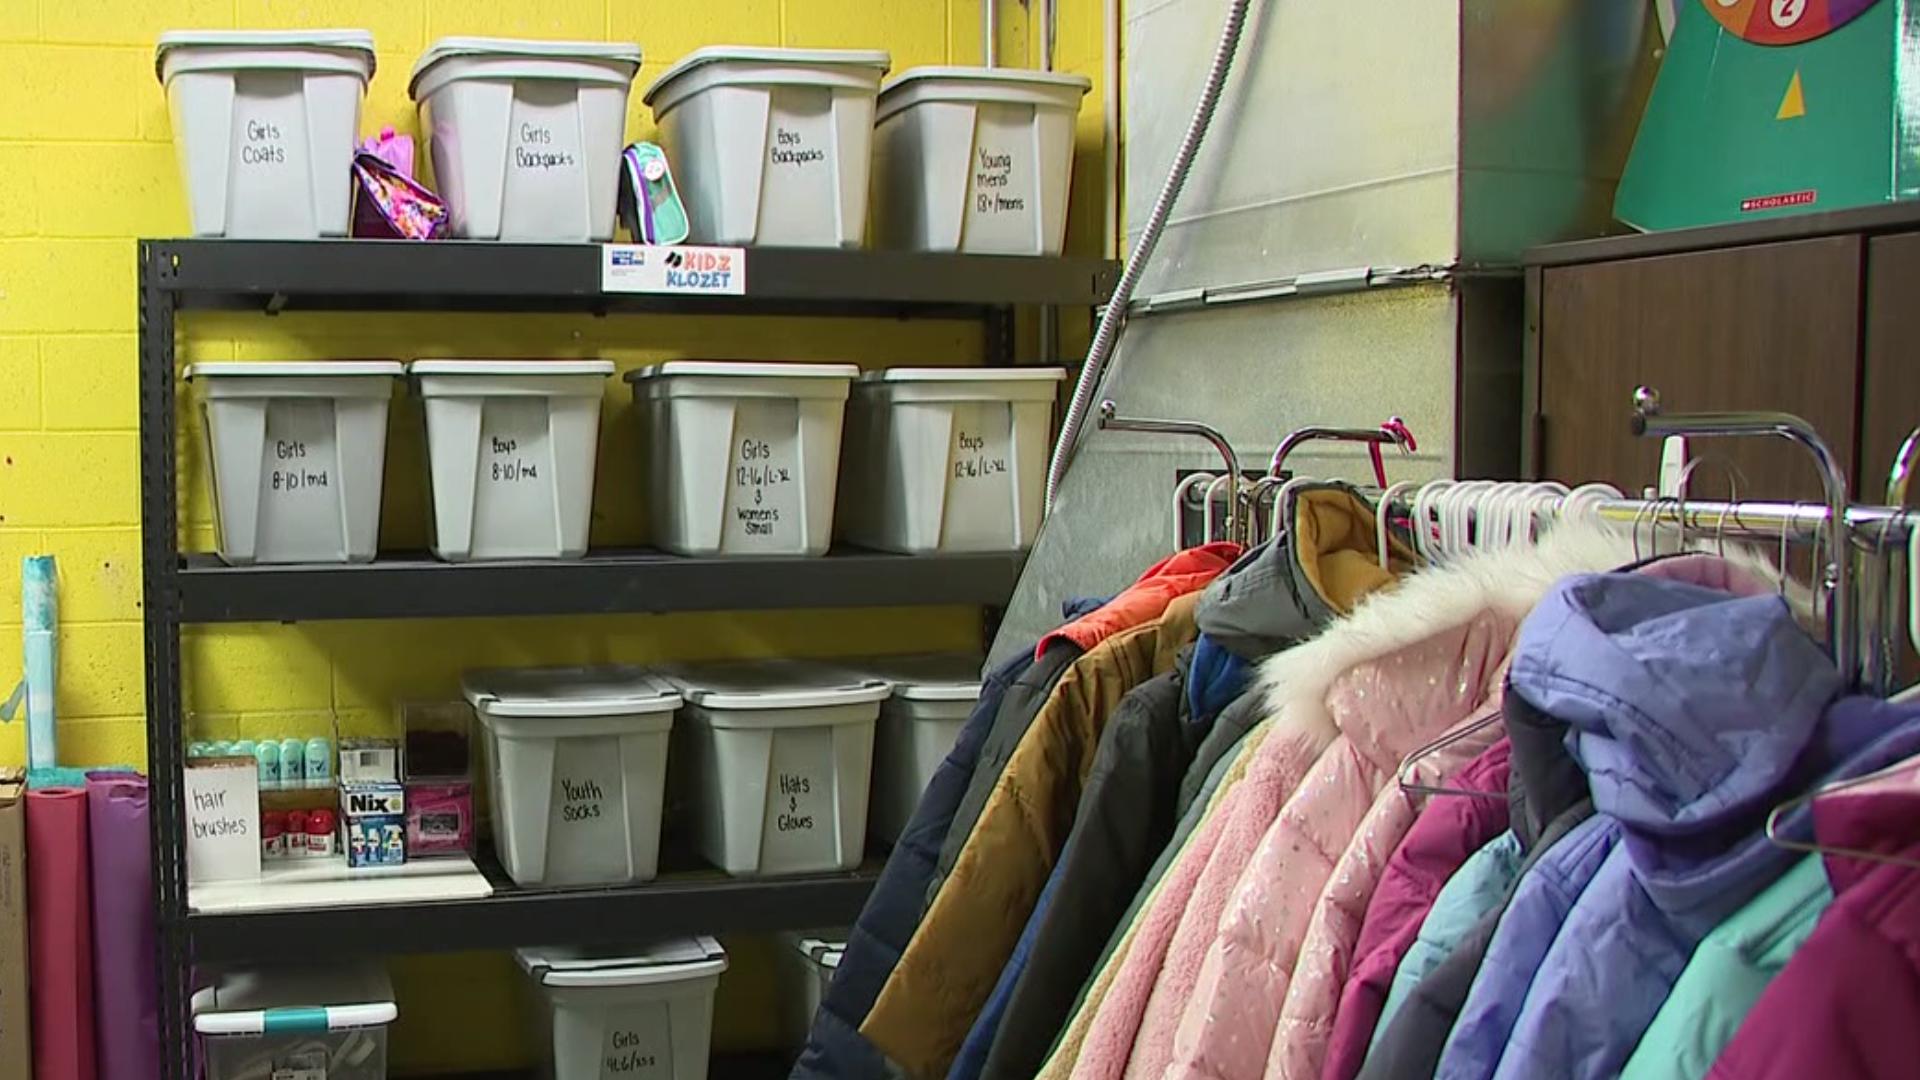 A Lycoming County school district is helping elementary students and parents in need.